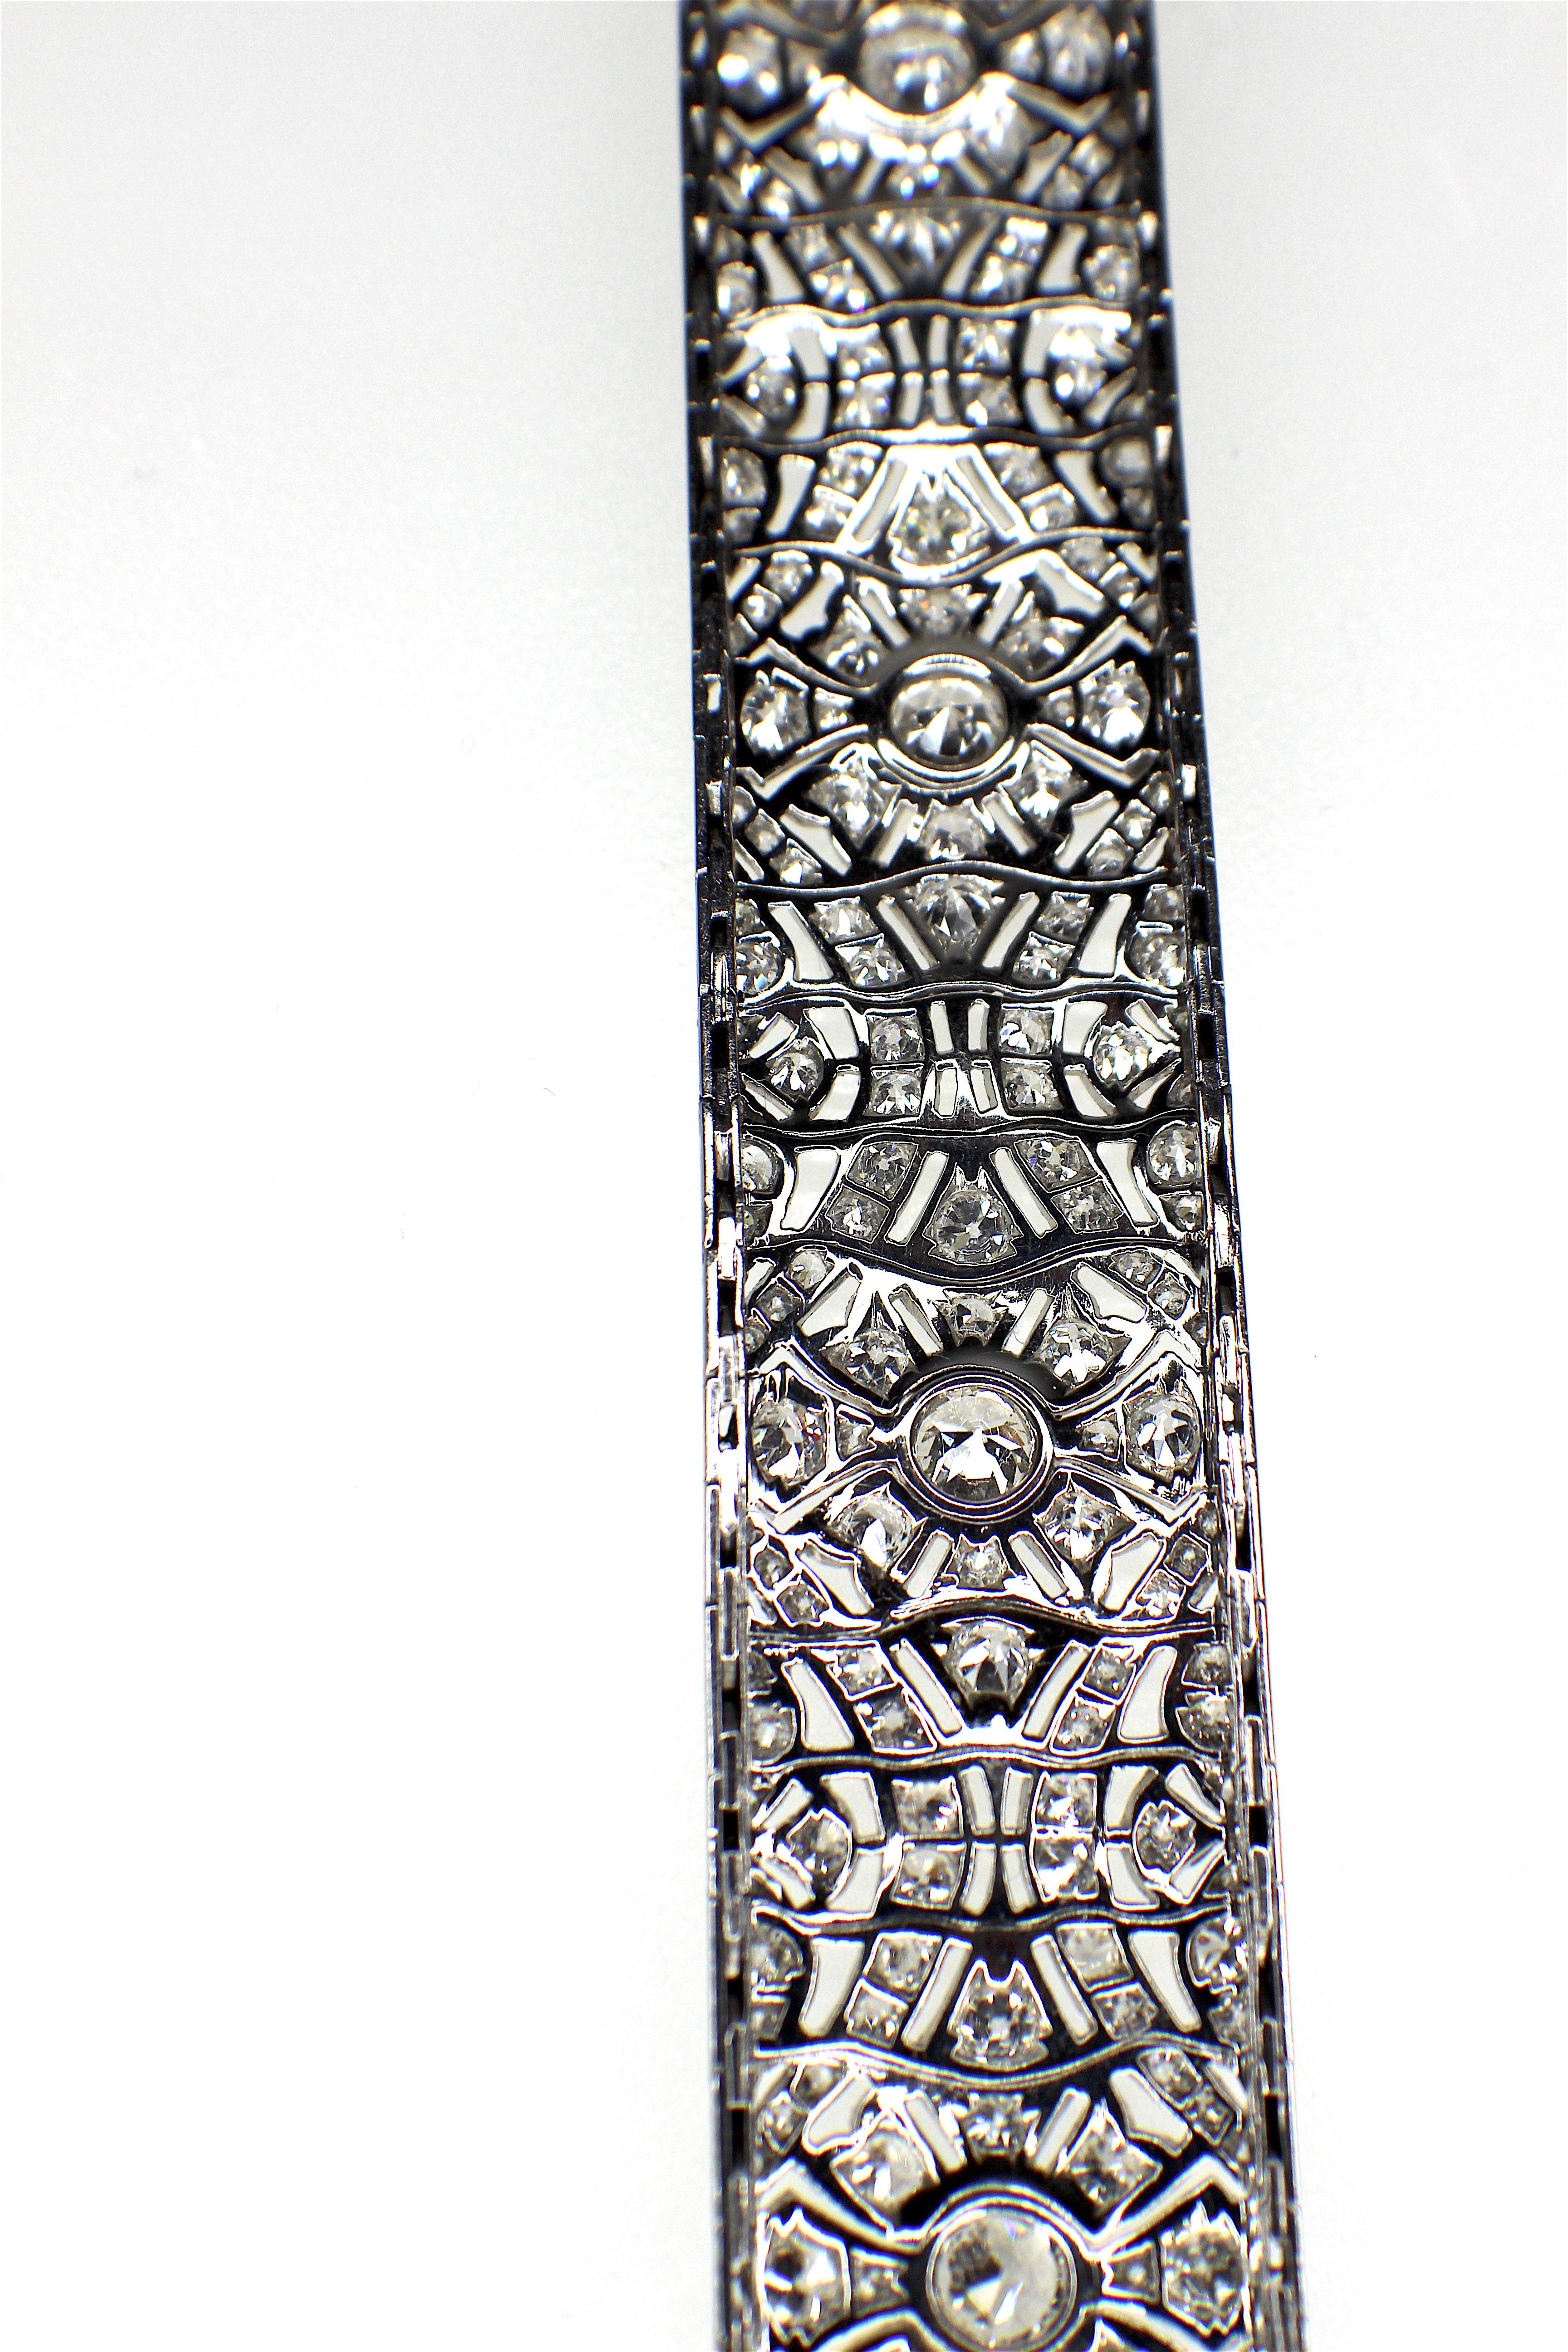 GEMOLITHOS a French, Art Deco diamond bracelet, in a wavy flower design, set with old-cut and eight-cut diamonds, millegrain setting and engraved sides, mounted in platinum, circa 1920's. French marks 